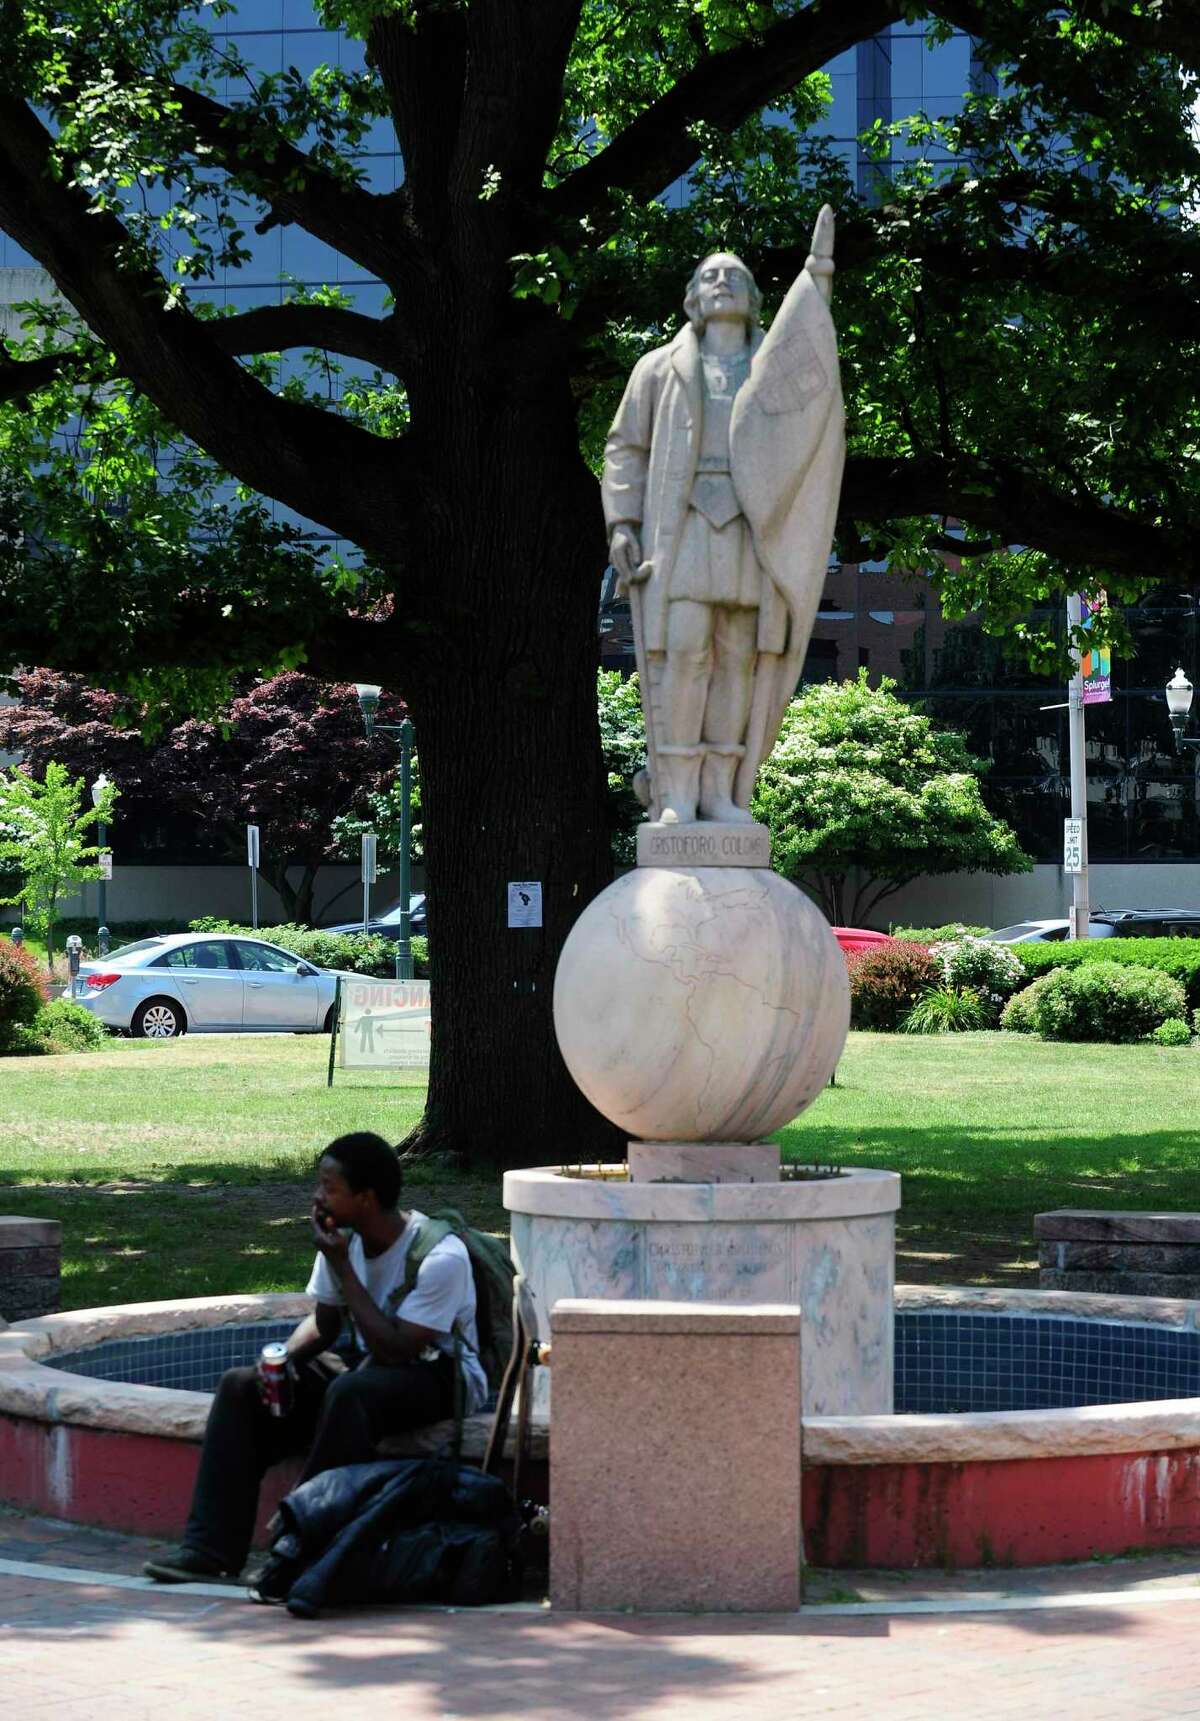 The City of Stamford has received numerous requests calling for the removal of the Christopher Columbus statue at Columbus Park in Stamford.